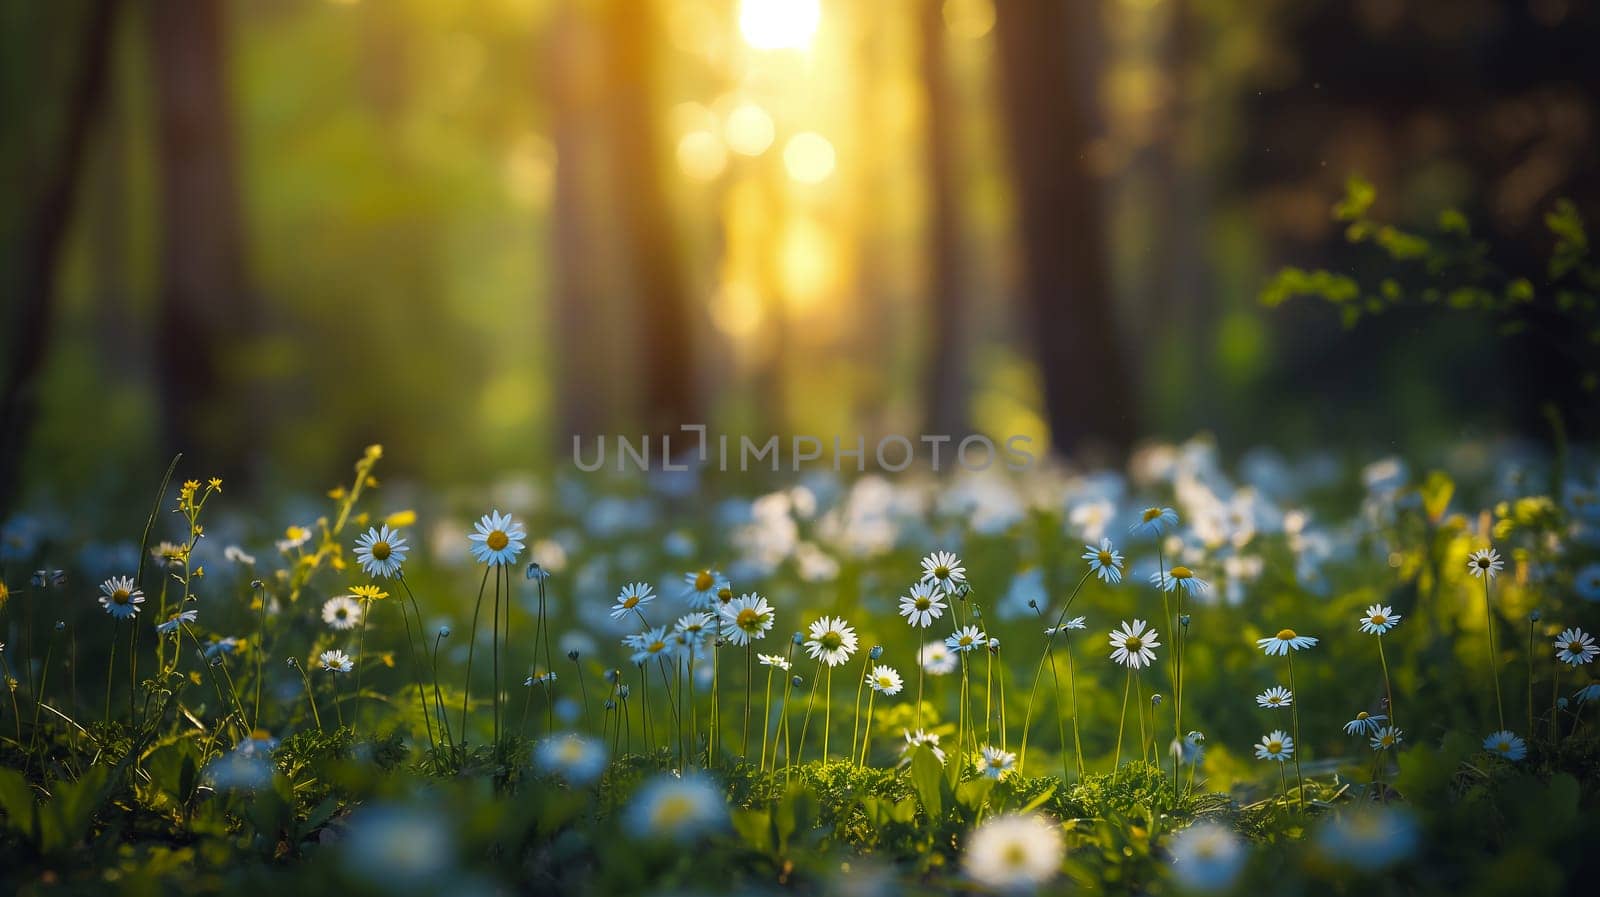 This image captures the serene beauty of a forest meadow filled with wildflowers, bathed in the warm glow of a setting sun.